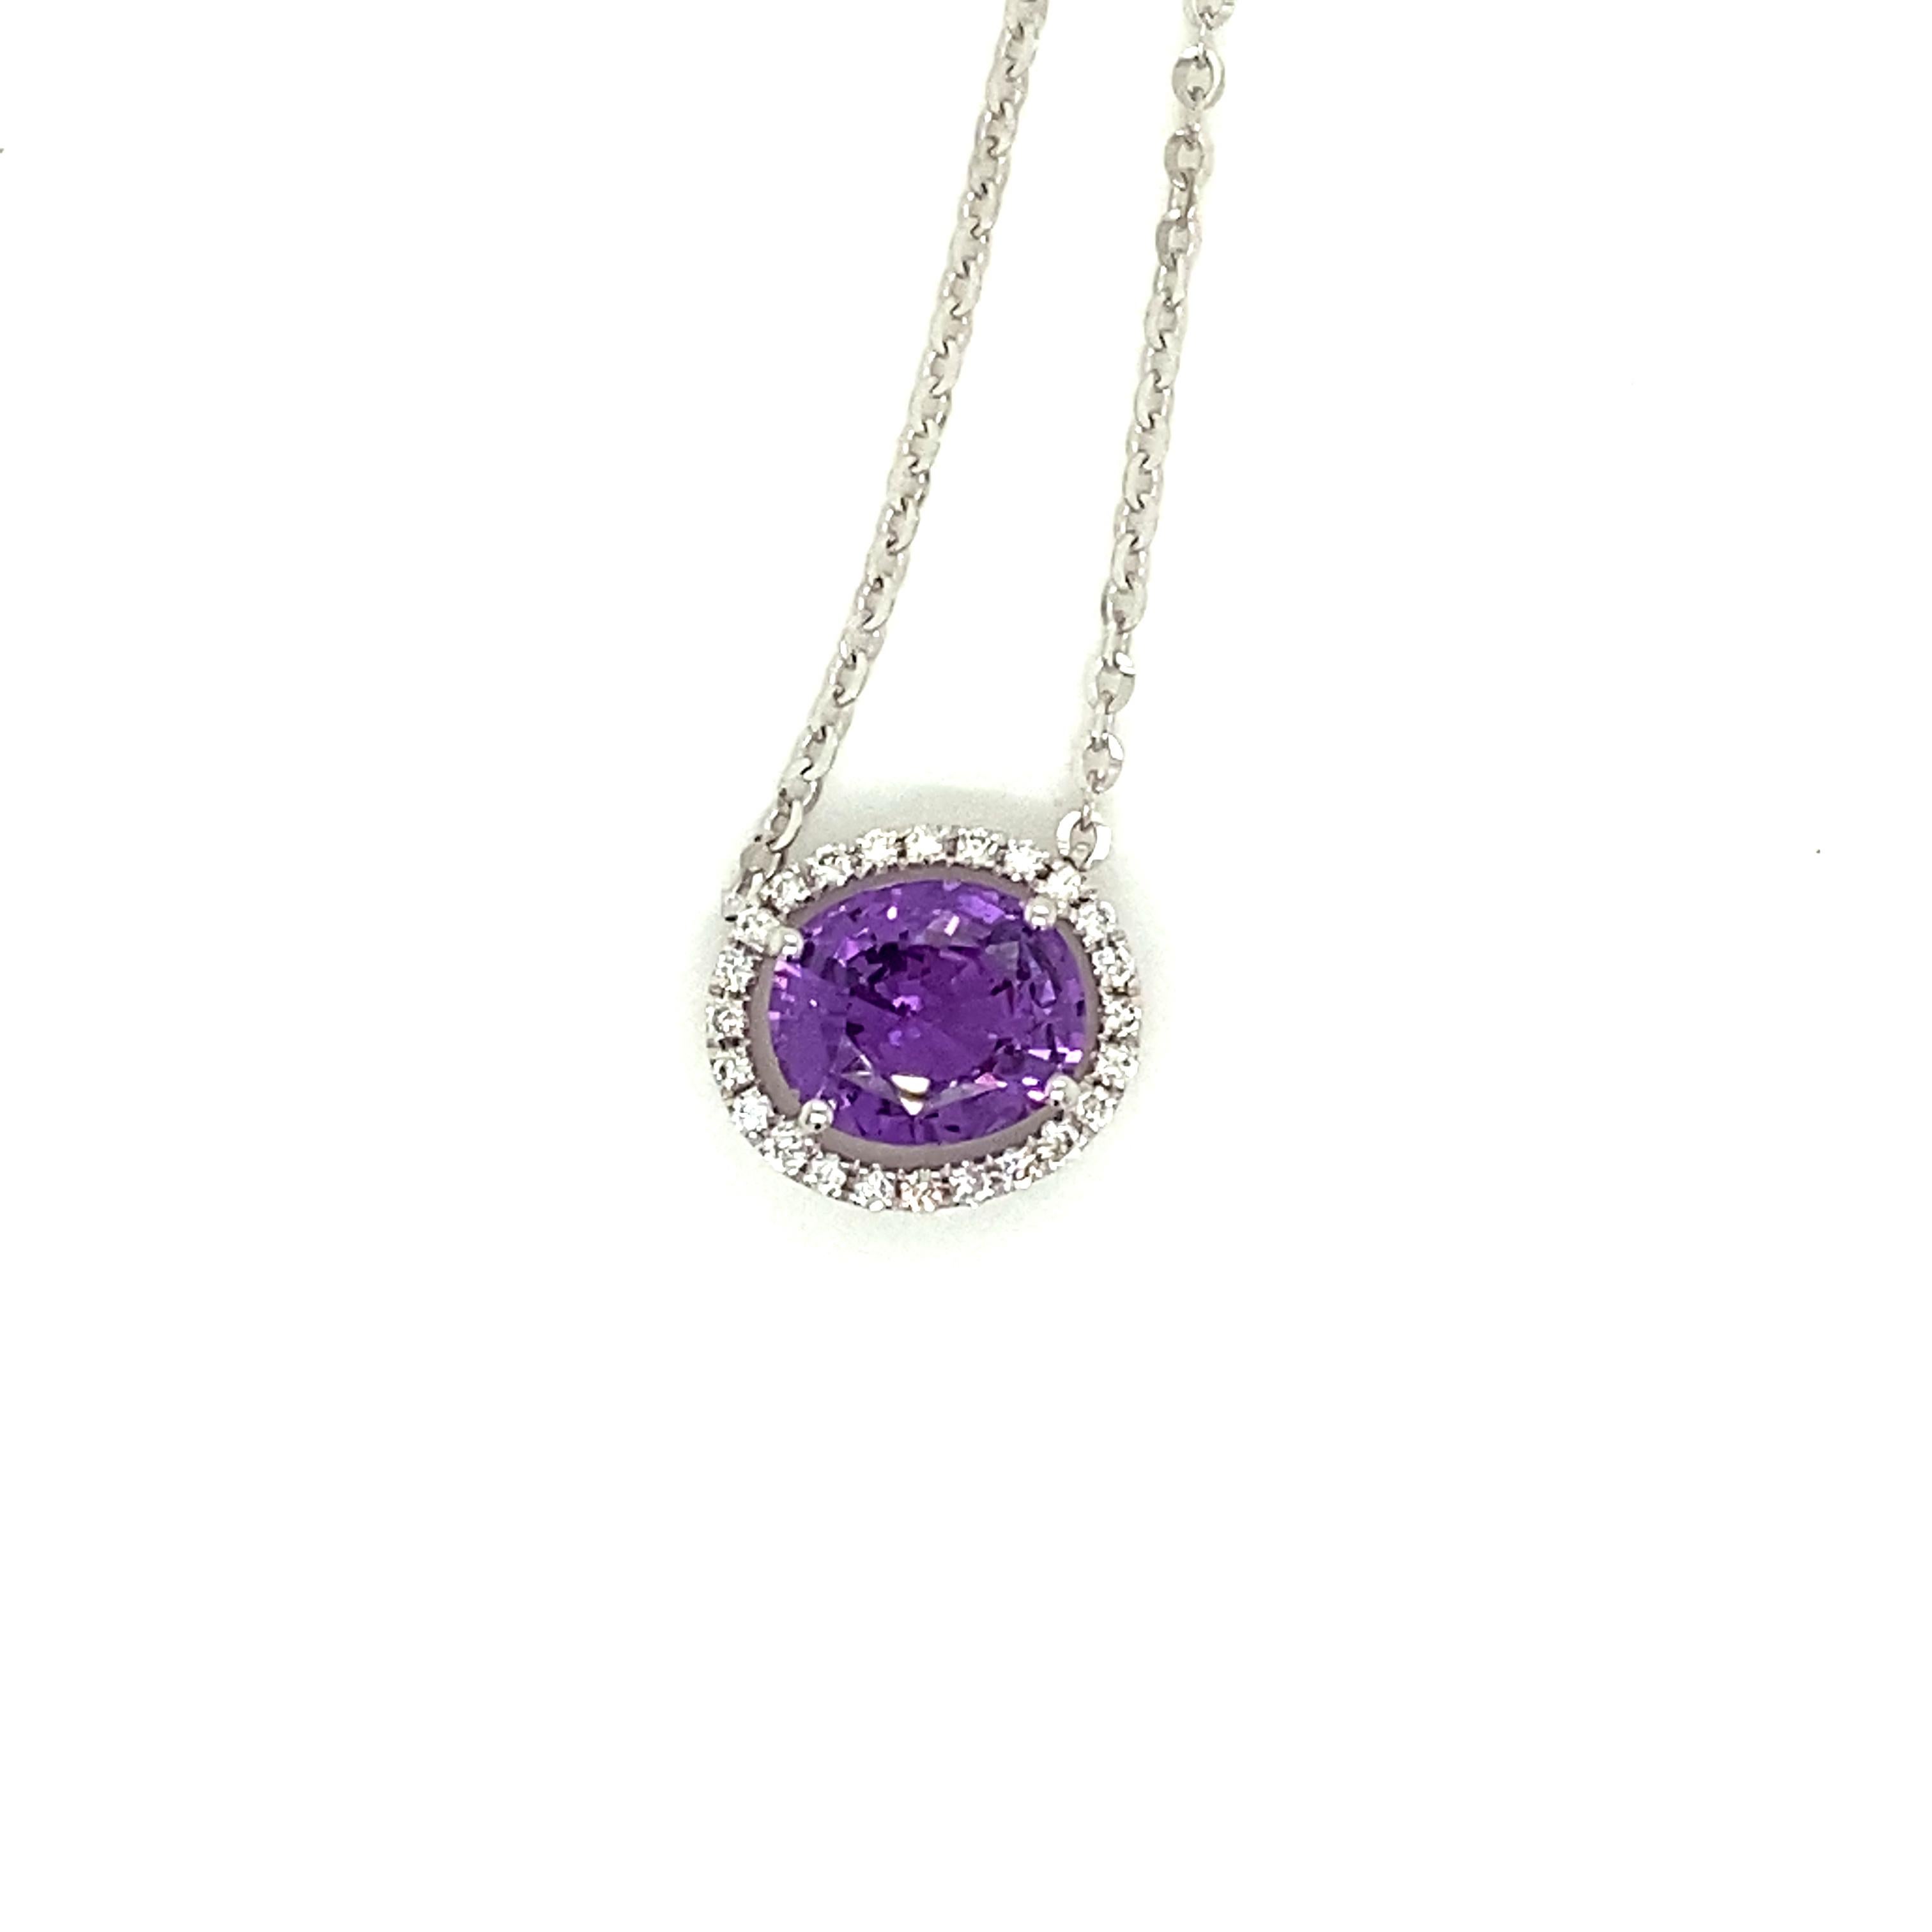 2.44 Carat Oval-Cut Purple Sapphire and White Diamond Pendant Necklace:

A beautiful pendant necklace, it features a 2.44 carat oval-cut purple sapphire in the centre surrounded by a halo of white round-brilliant cut diamonds weighing 0.15 carat.